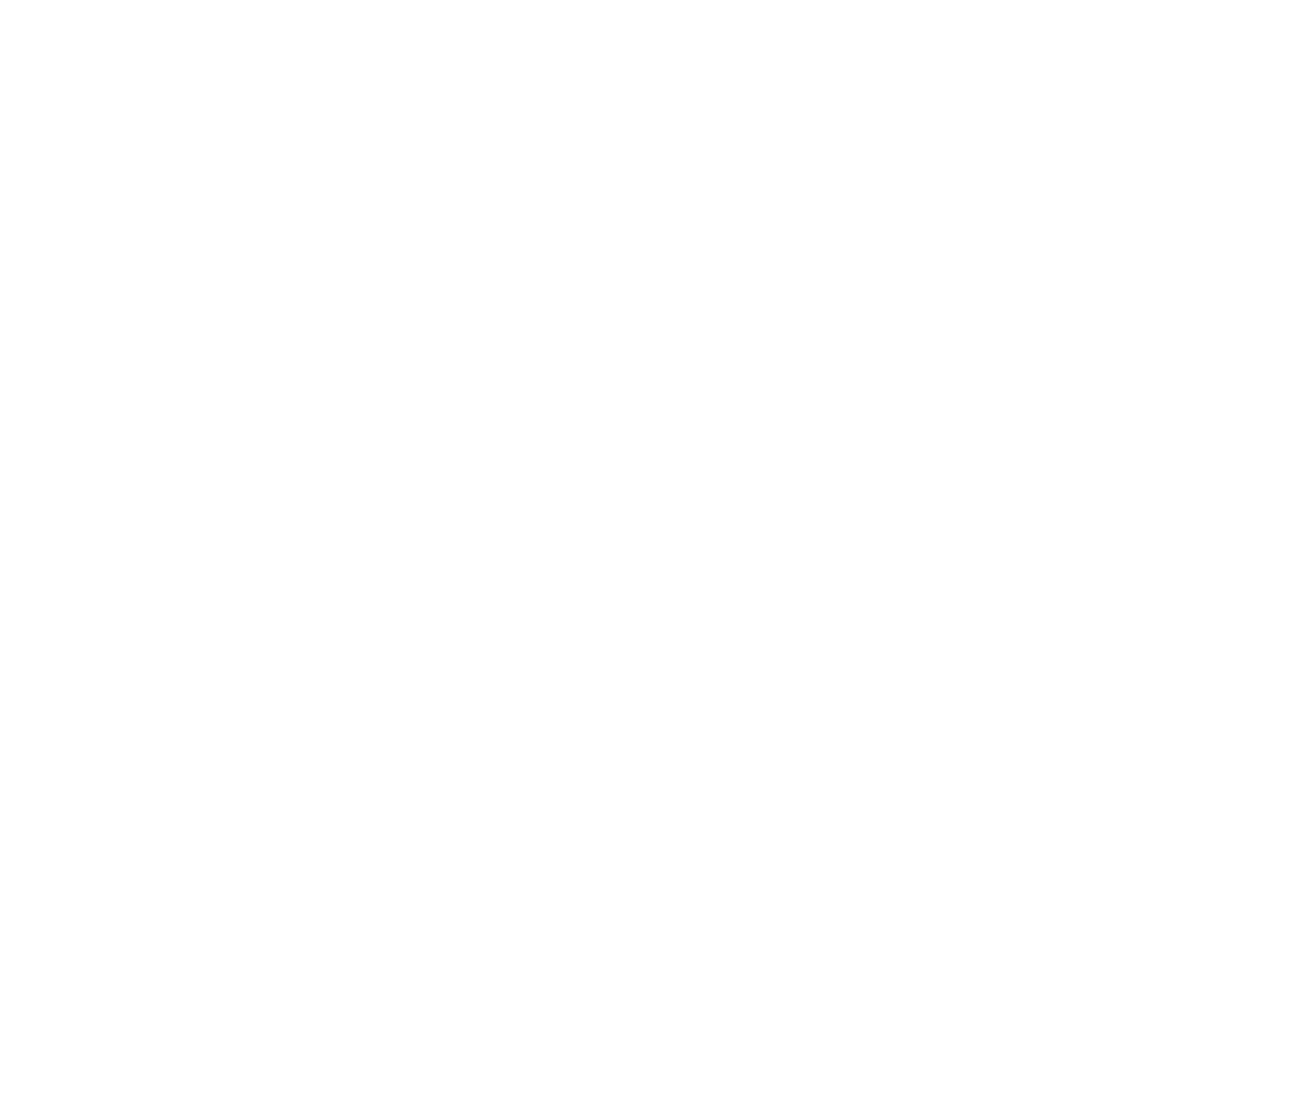 The garden provides produce for the school canteen. Snow peas have been sold for just 5 cents and proved really popul...